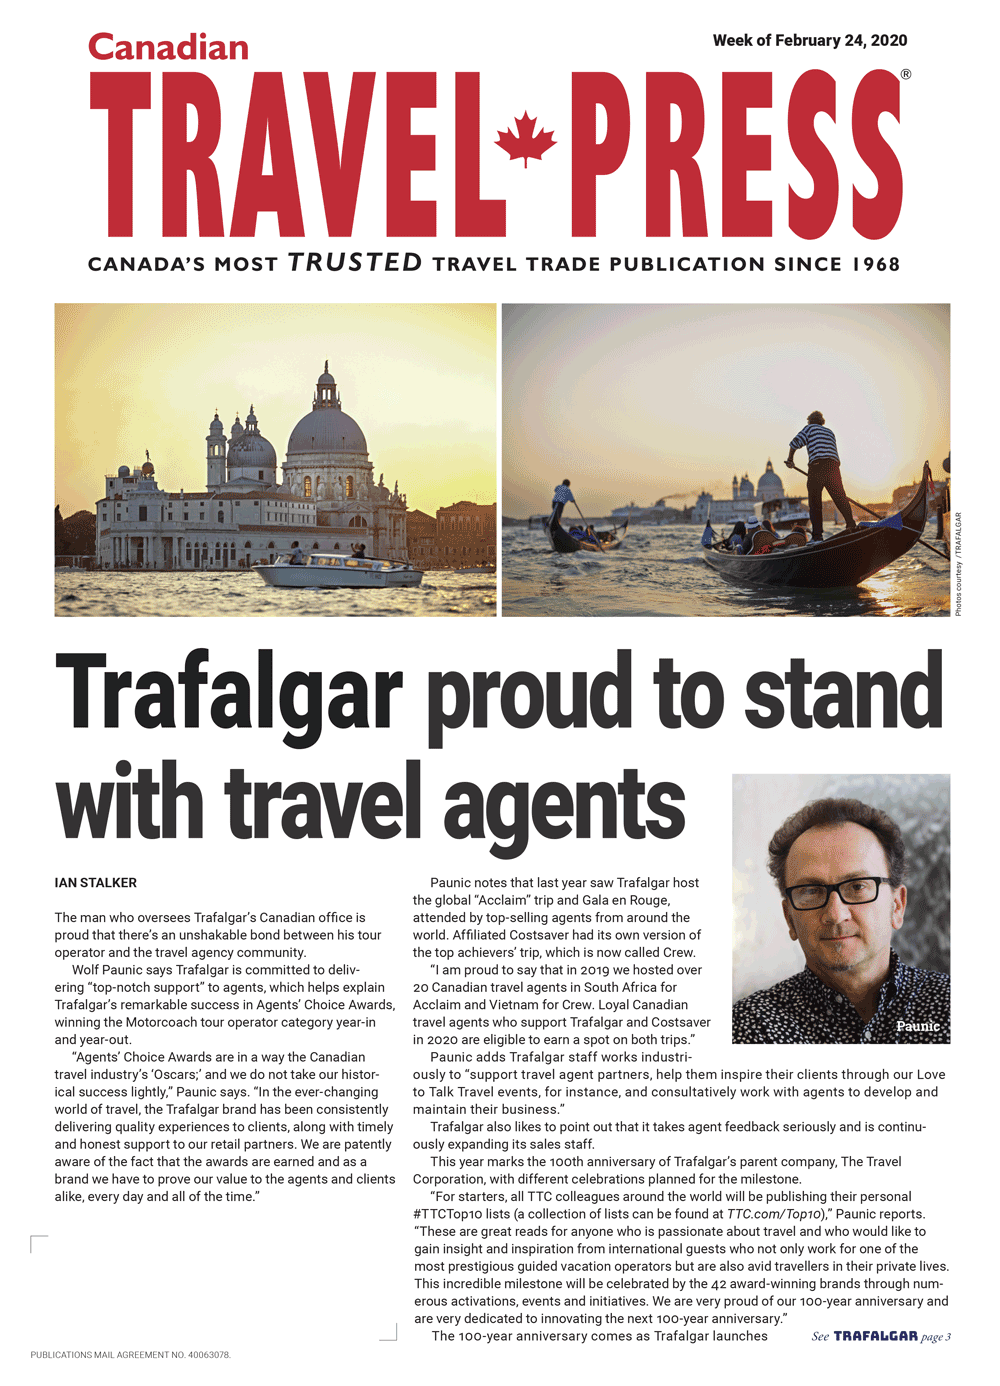 Trafalgar stands with agents